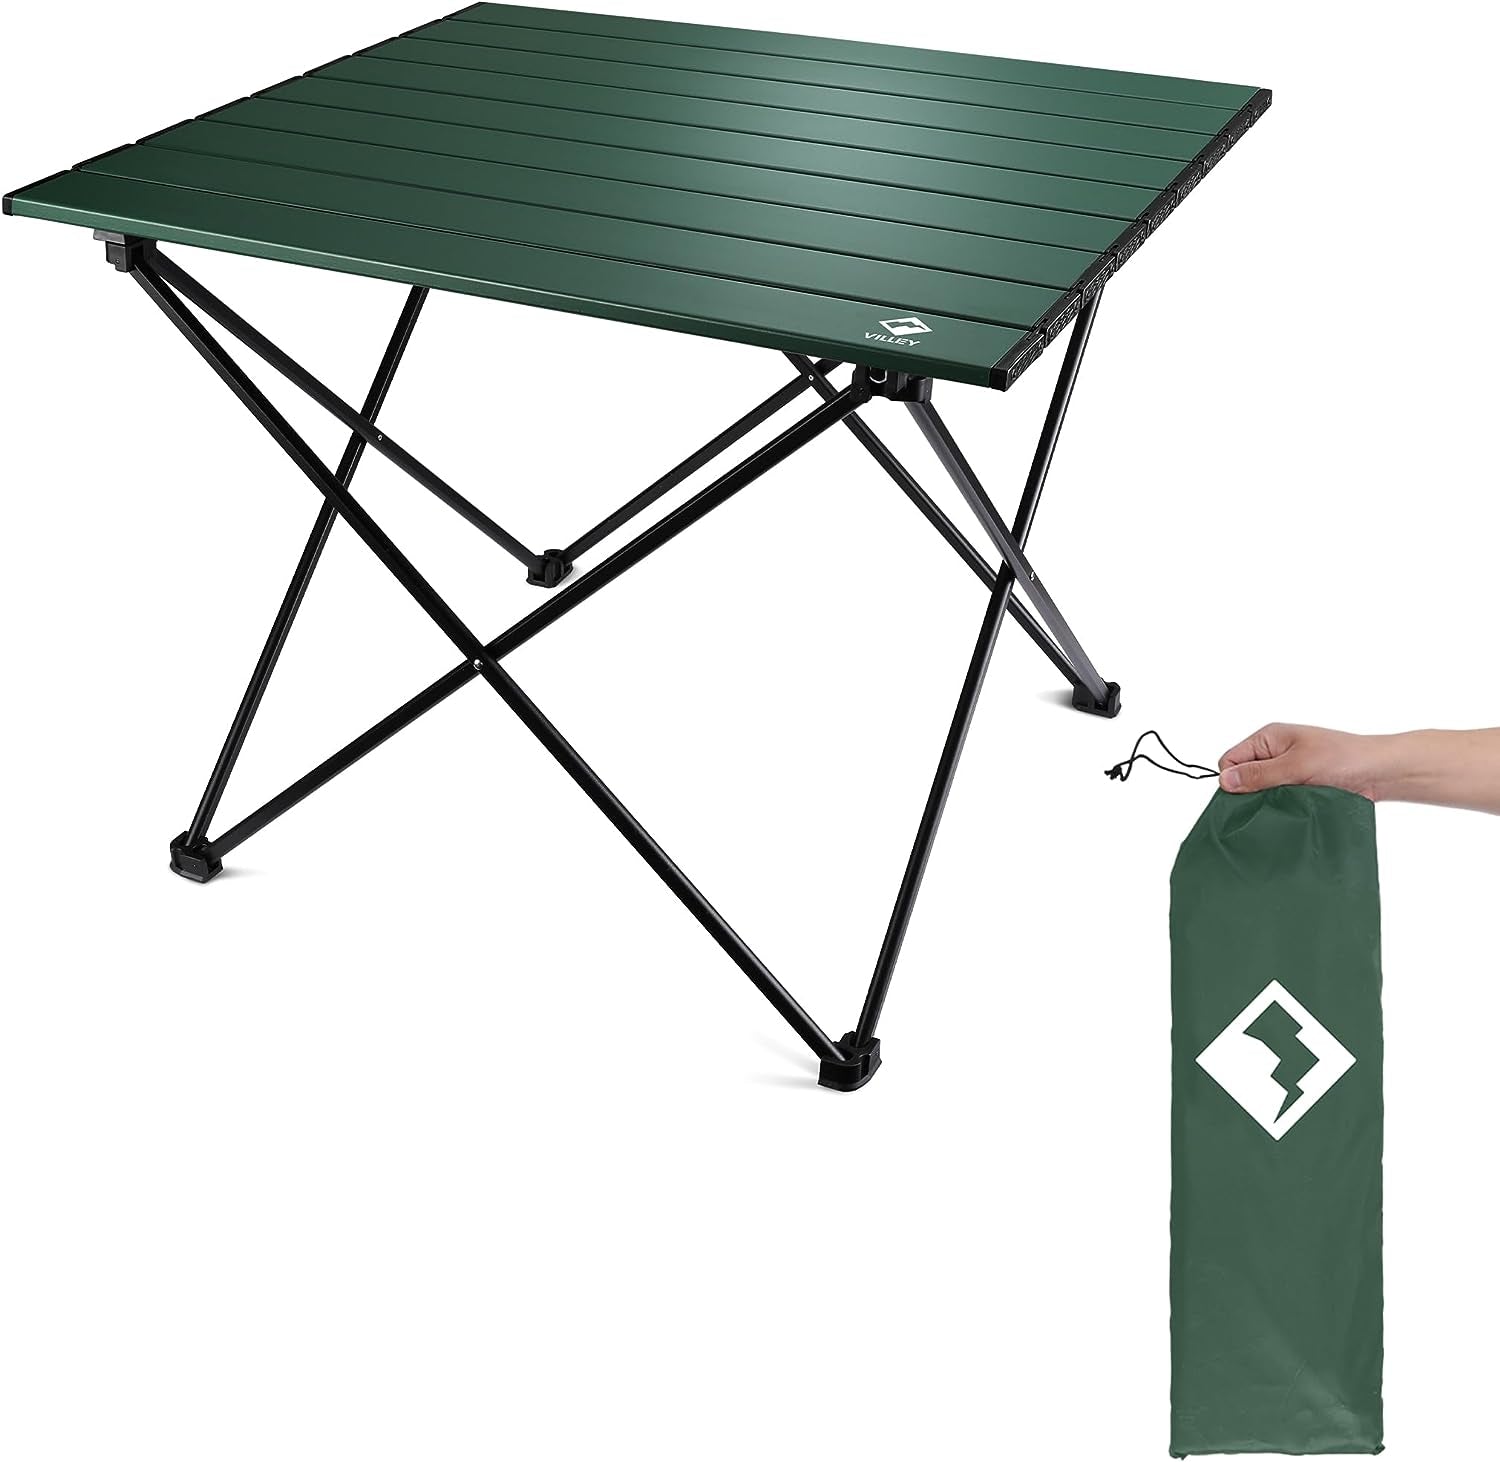 VILLEY Portable Camping Side Table, Ultralight Aluminum Folding Beach Table with Carry Bag for Outdoor Cooking, Picnic, Camp, Boat, Travel